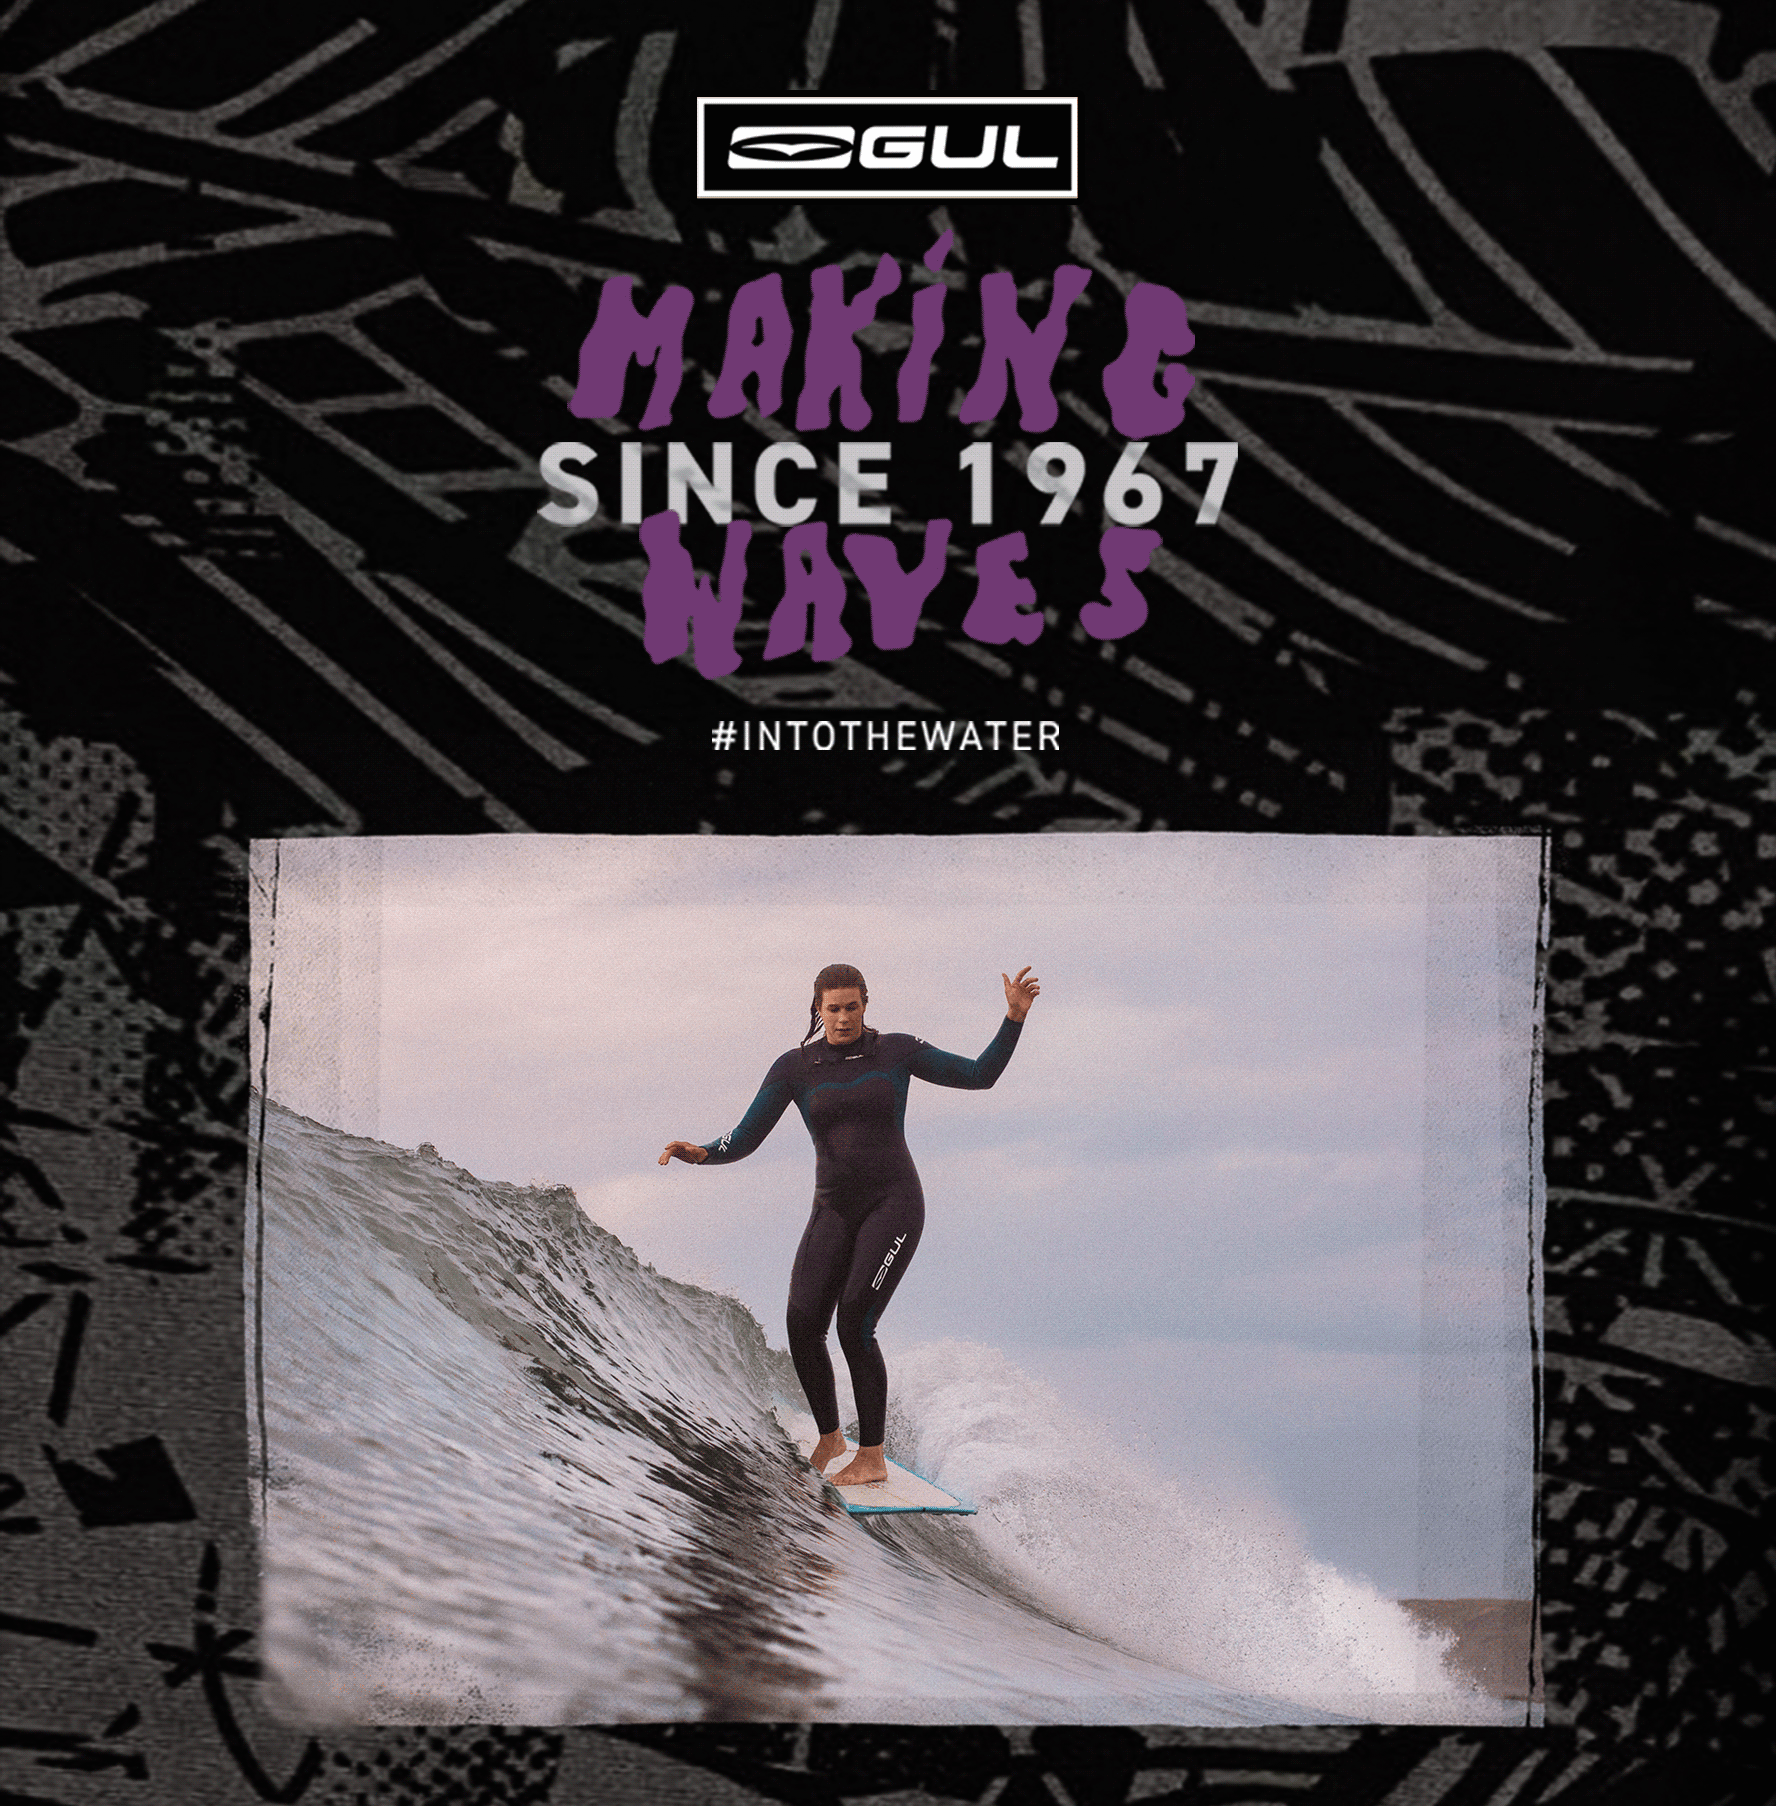 Making Waves Since 1967